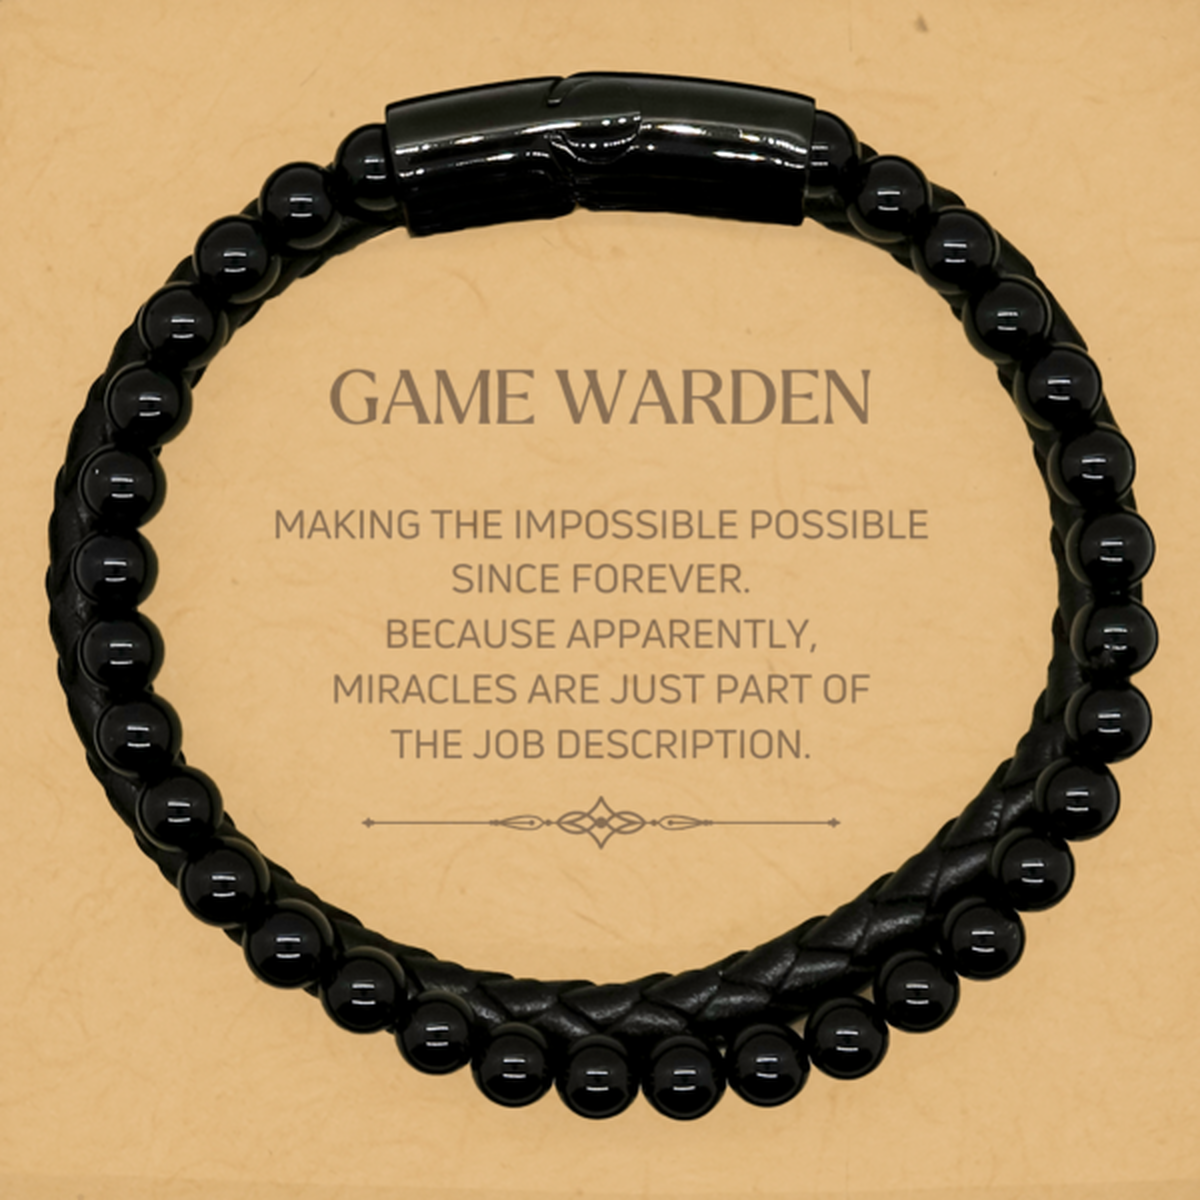 Funny Game Warden Gifts, Miracles are just part of the job description, Inspirational Birthday Stone Leather Bracelets For Game Warden, Men, Women, Coworkers, Friends, Boss